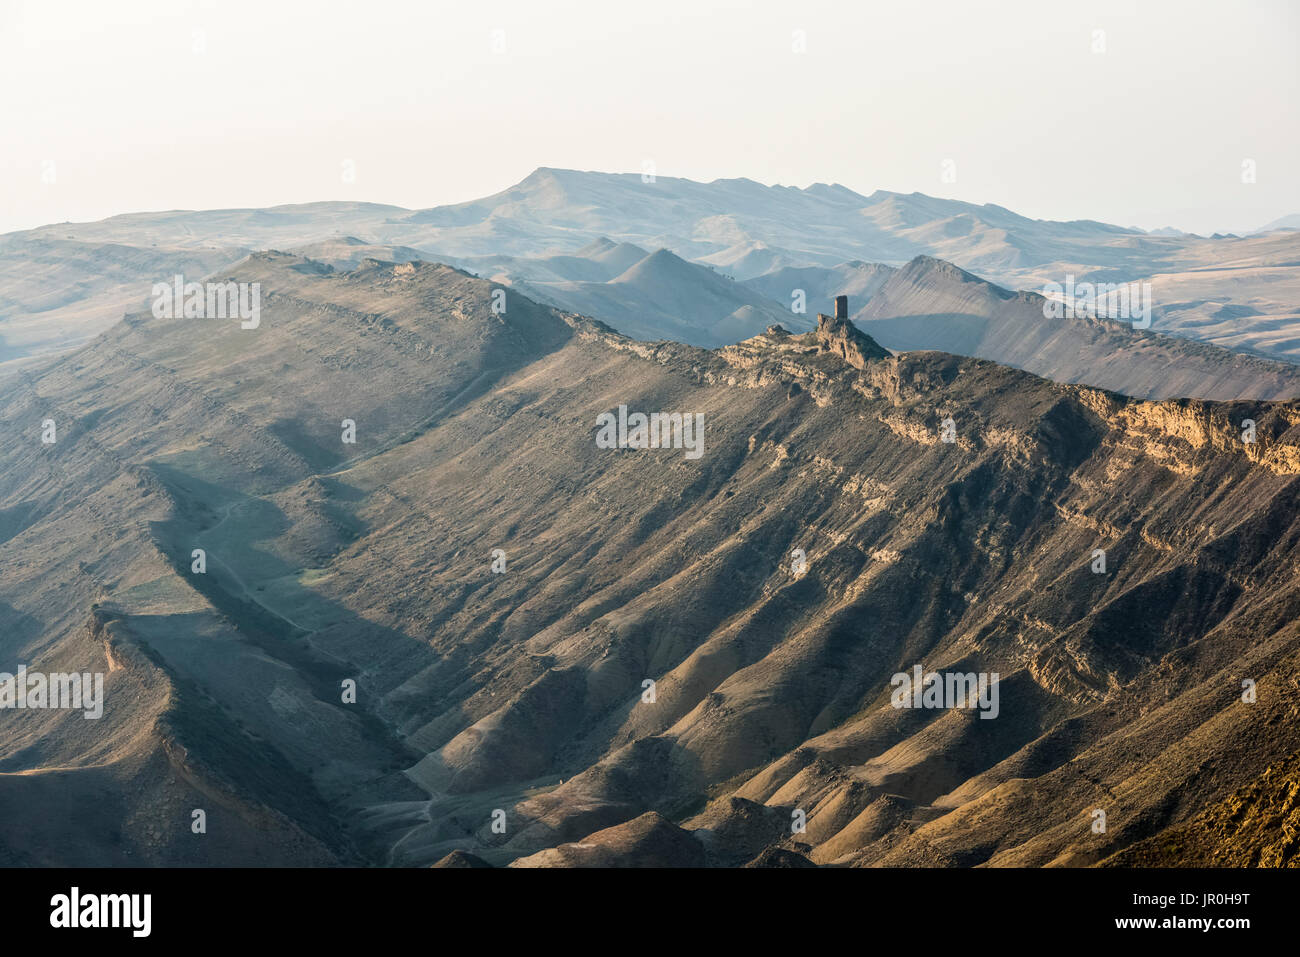 A Mountain Ridge Near The David Gareja Monastery Complex At The Disputable Georgiaâ€“azerbaijan Border With Clearly Visible Remnants Of Ancient Mon... Stock Photo